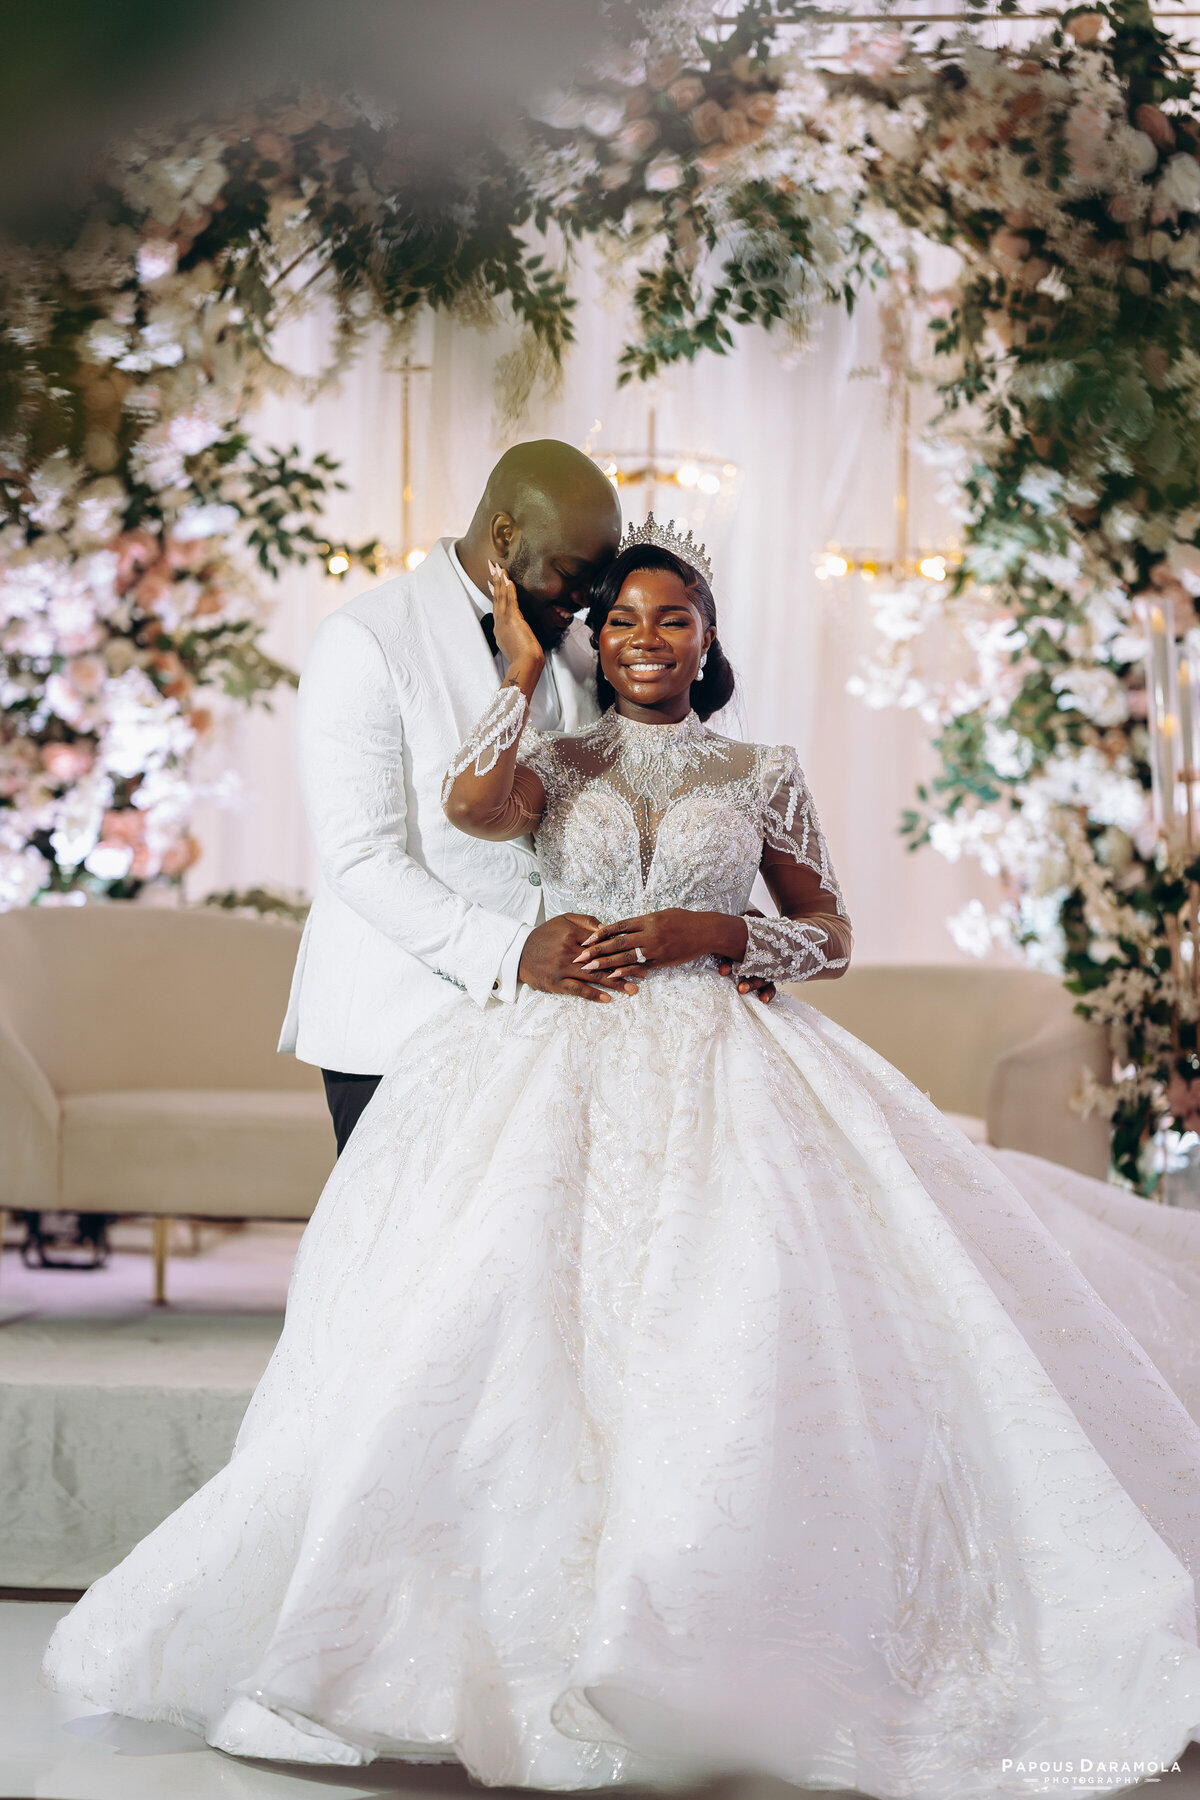 Abigail and Abije Oruka Events Papouse photographer Wedding event planners Toronto planner African Nigerian Eyitayo Dada Dara Ayoola outdoor ceremony floral princess ballgown rolls royce groom suit potraits  paradise banquet hall vaughn 210